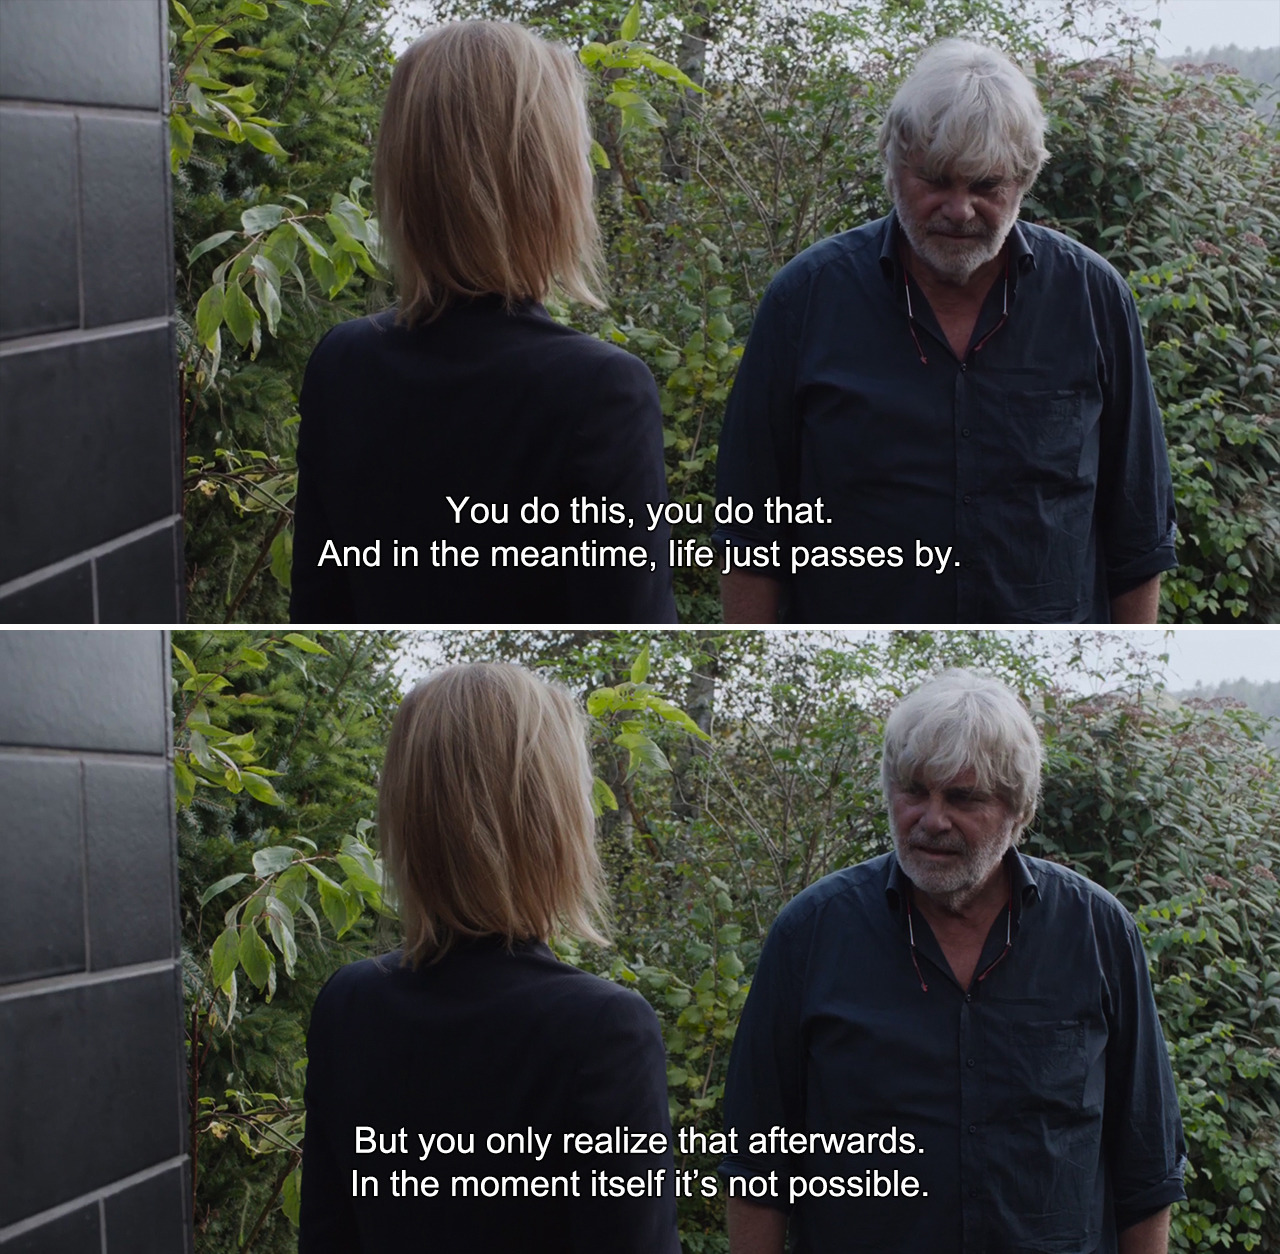 ― Toni Erdmann (2016)
Winfried: You do this, you do that. And in the meantime, life just passes by. But you only realize that afterwards. In the moment itself it’s not possible.